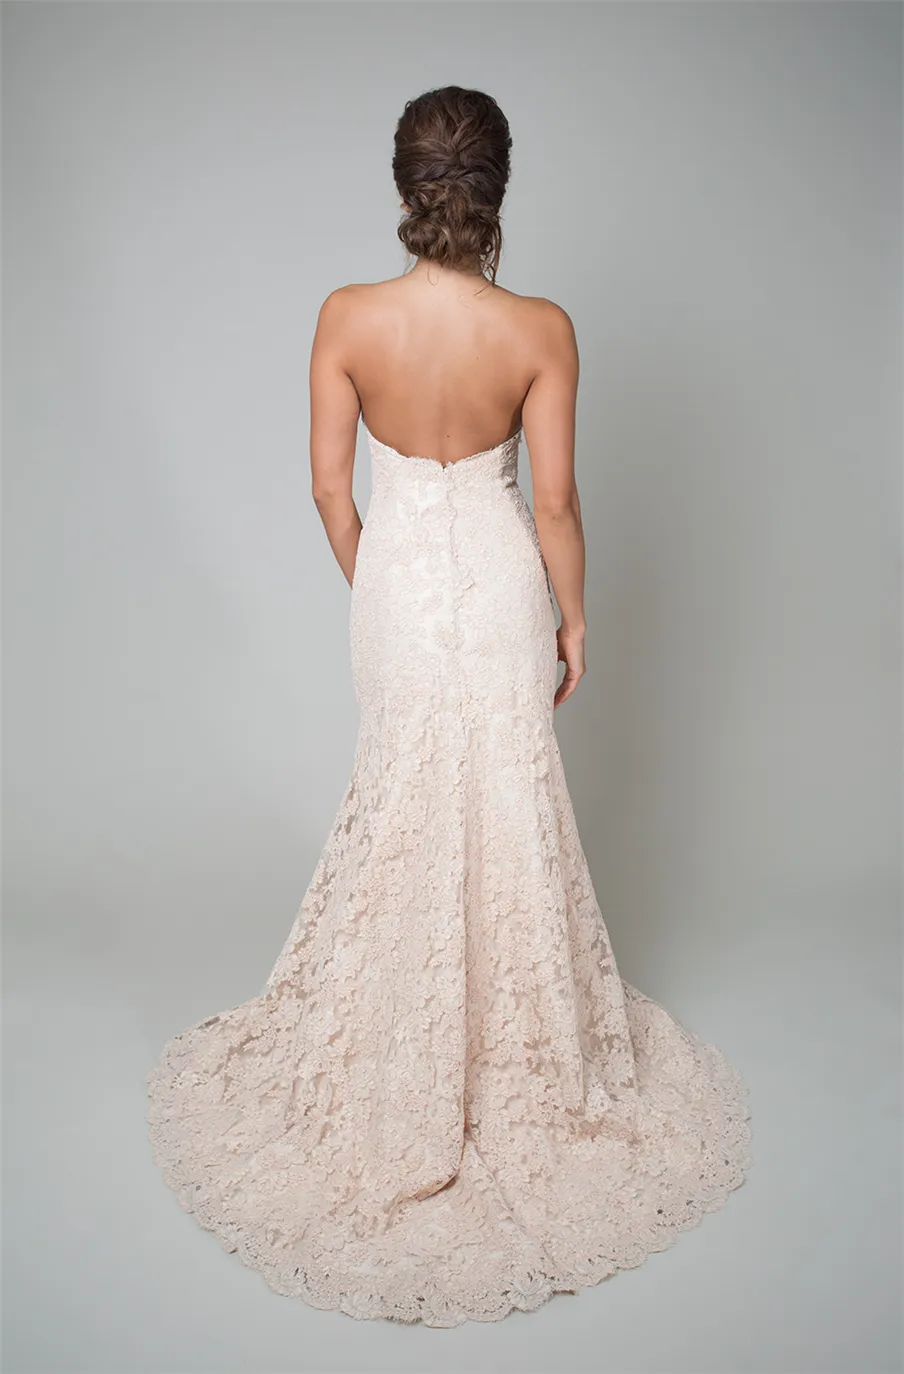 Trumpet Style Wedding Gown Blush Base With Blush Italian Alencon Lace a Sweetheart Neckline Low Back And a Chapel Train Bridal Dress